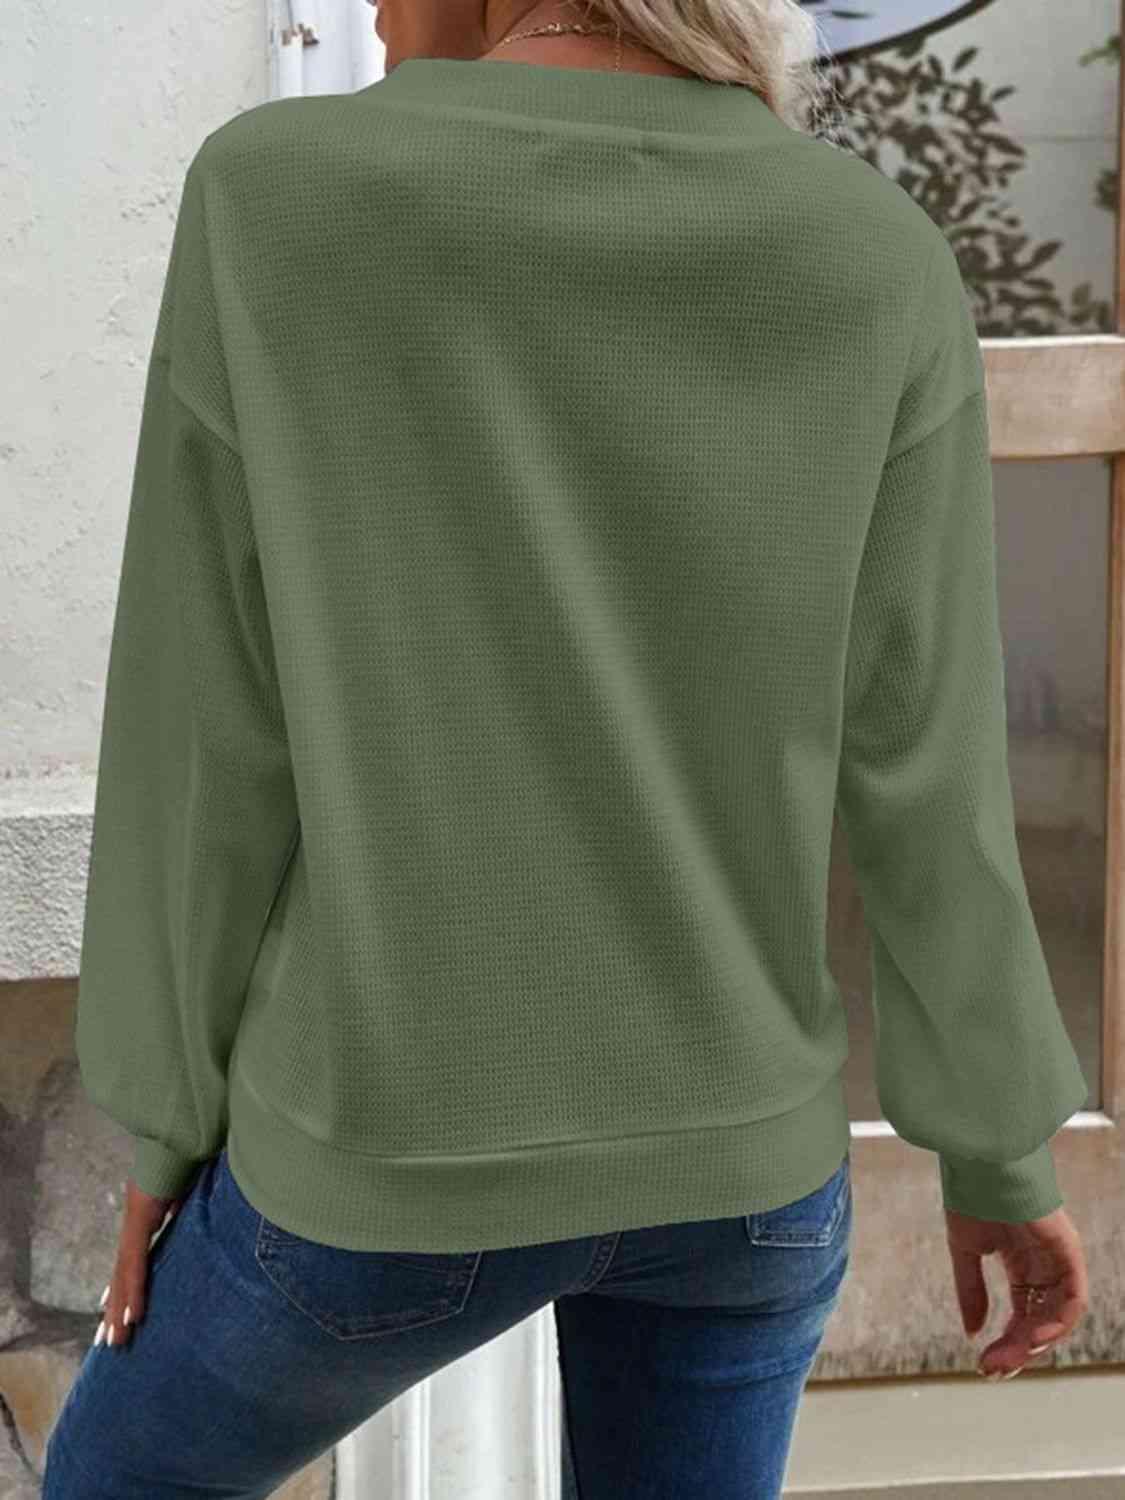 a woman wearing a green sweater and jeans